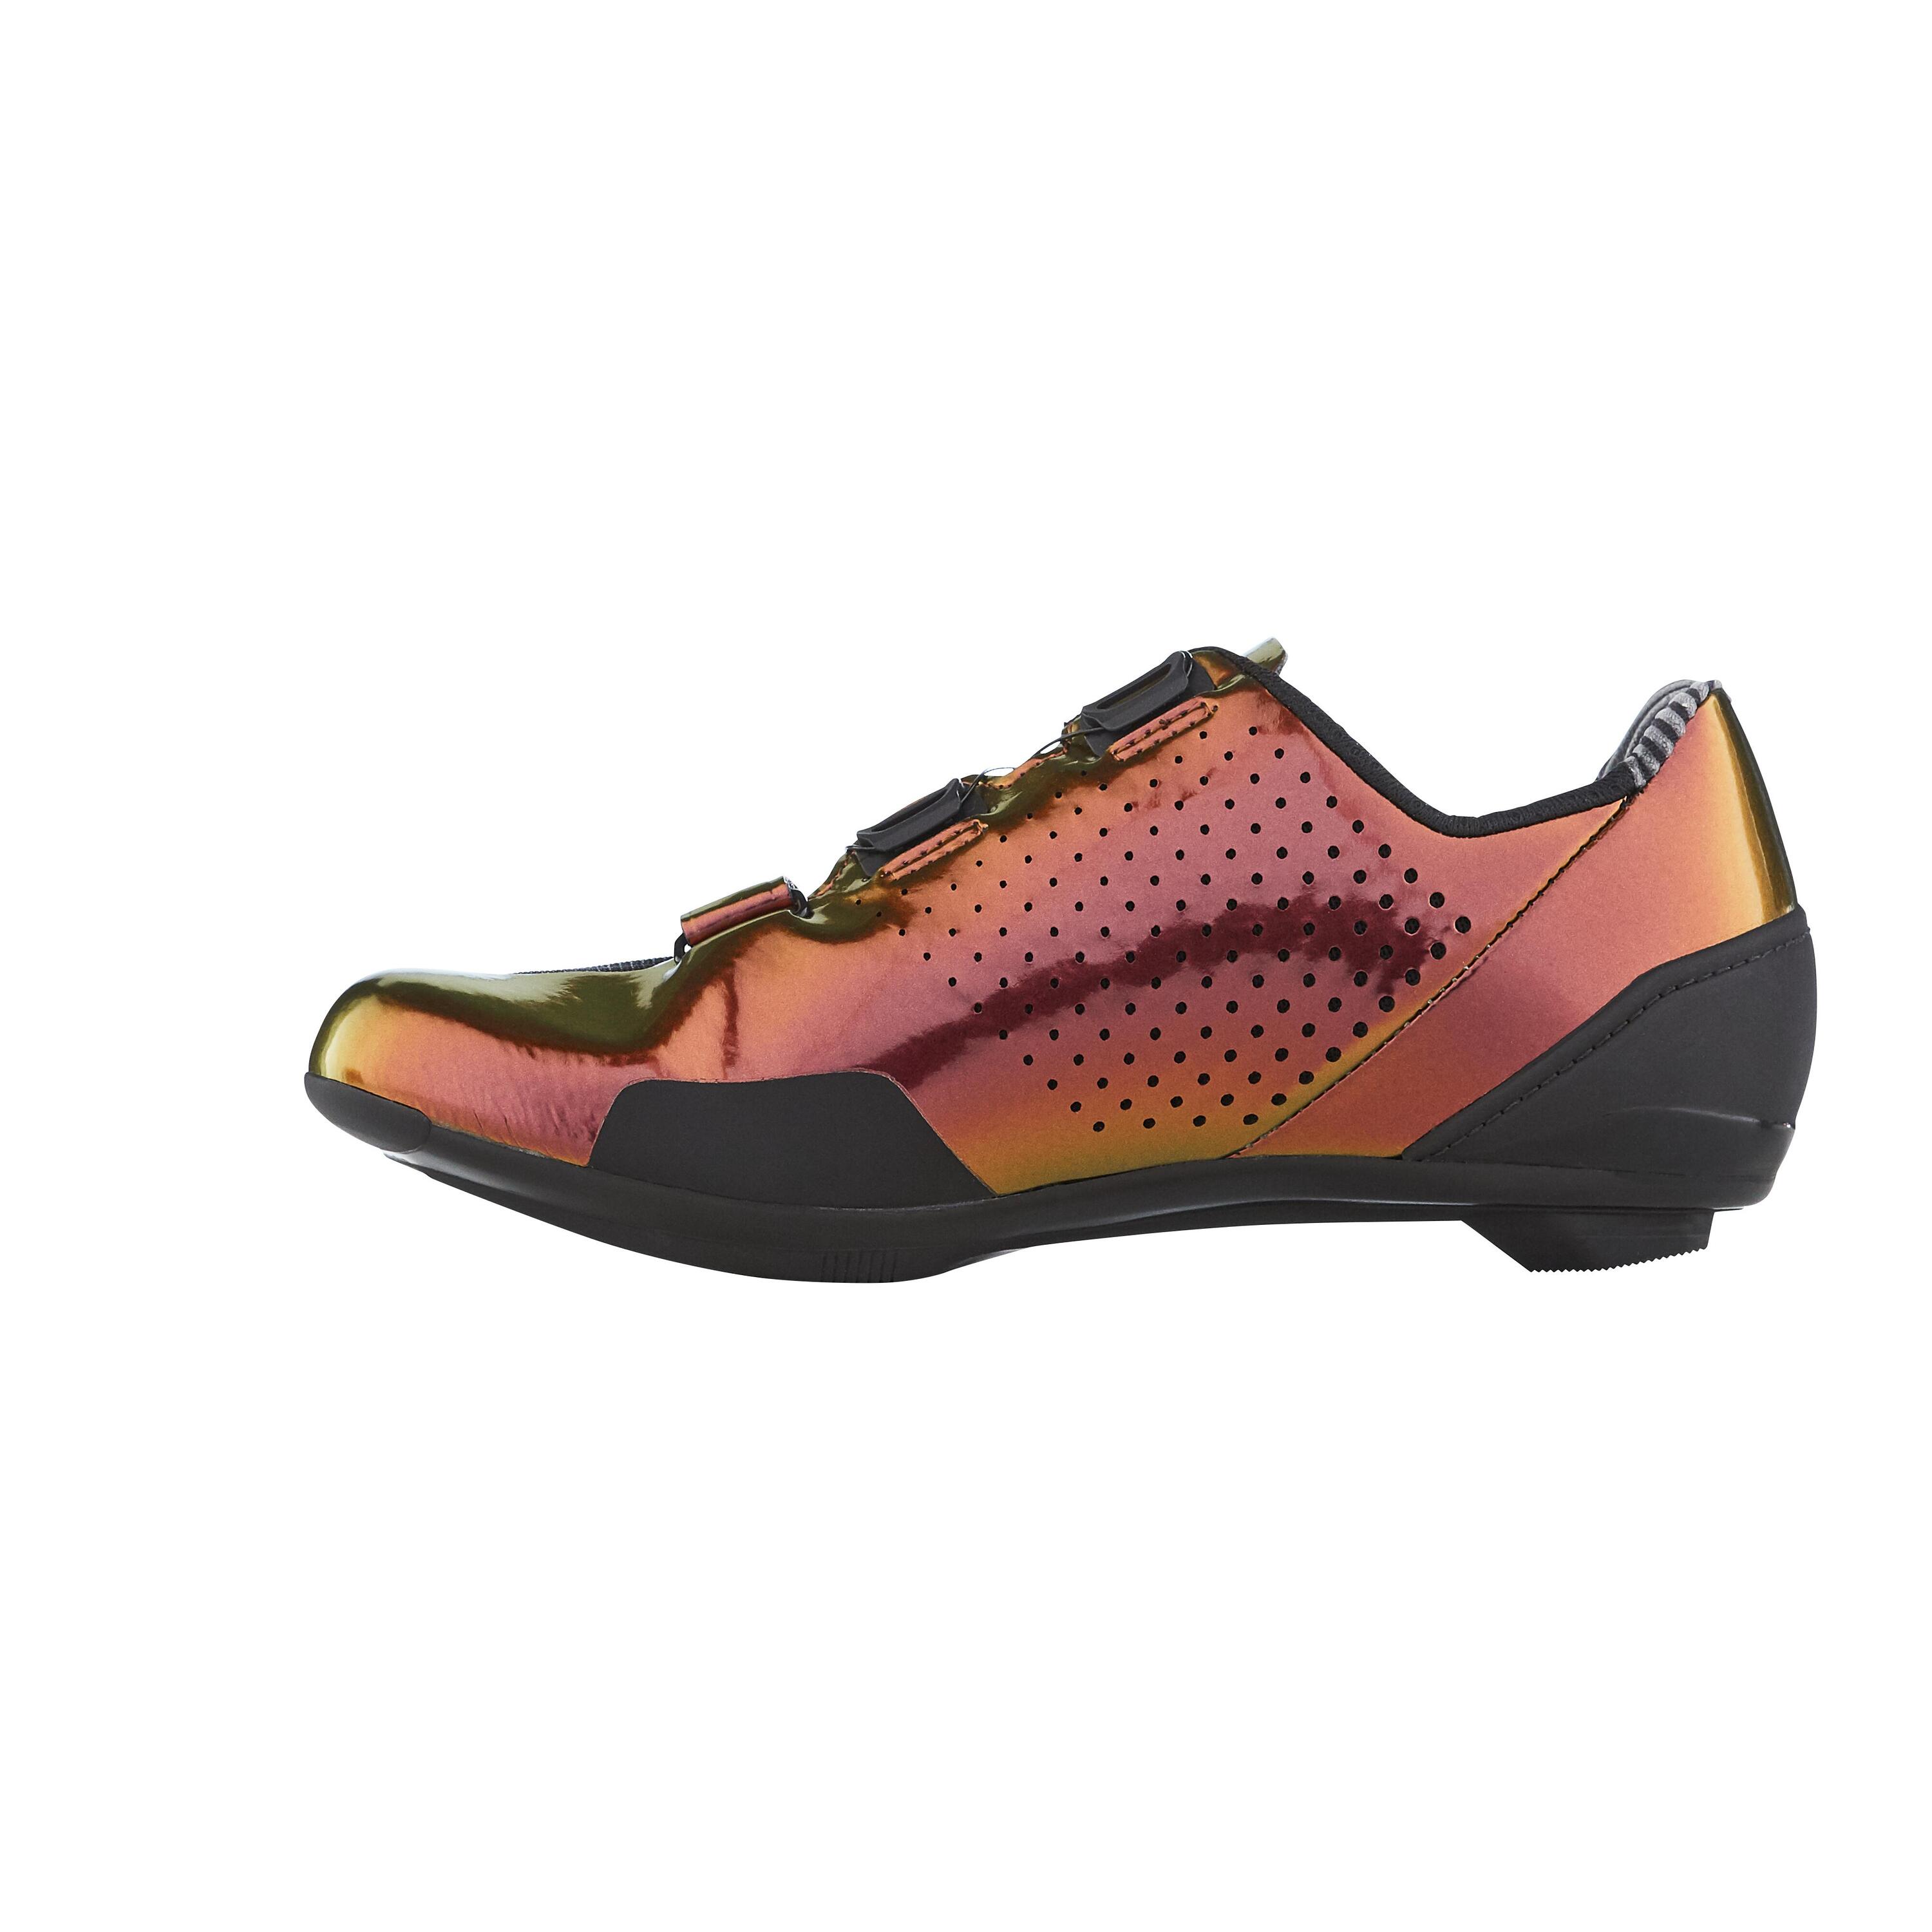 RoadR 520 Women's Carbon Road Cycling Shoes - Iridescent Burgundy 3/6